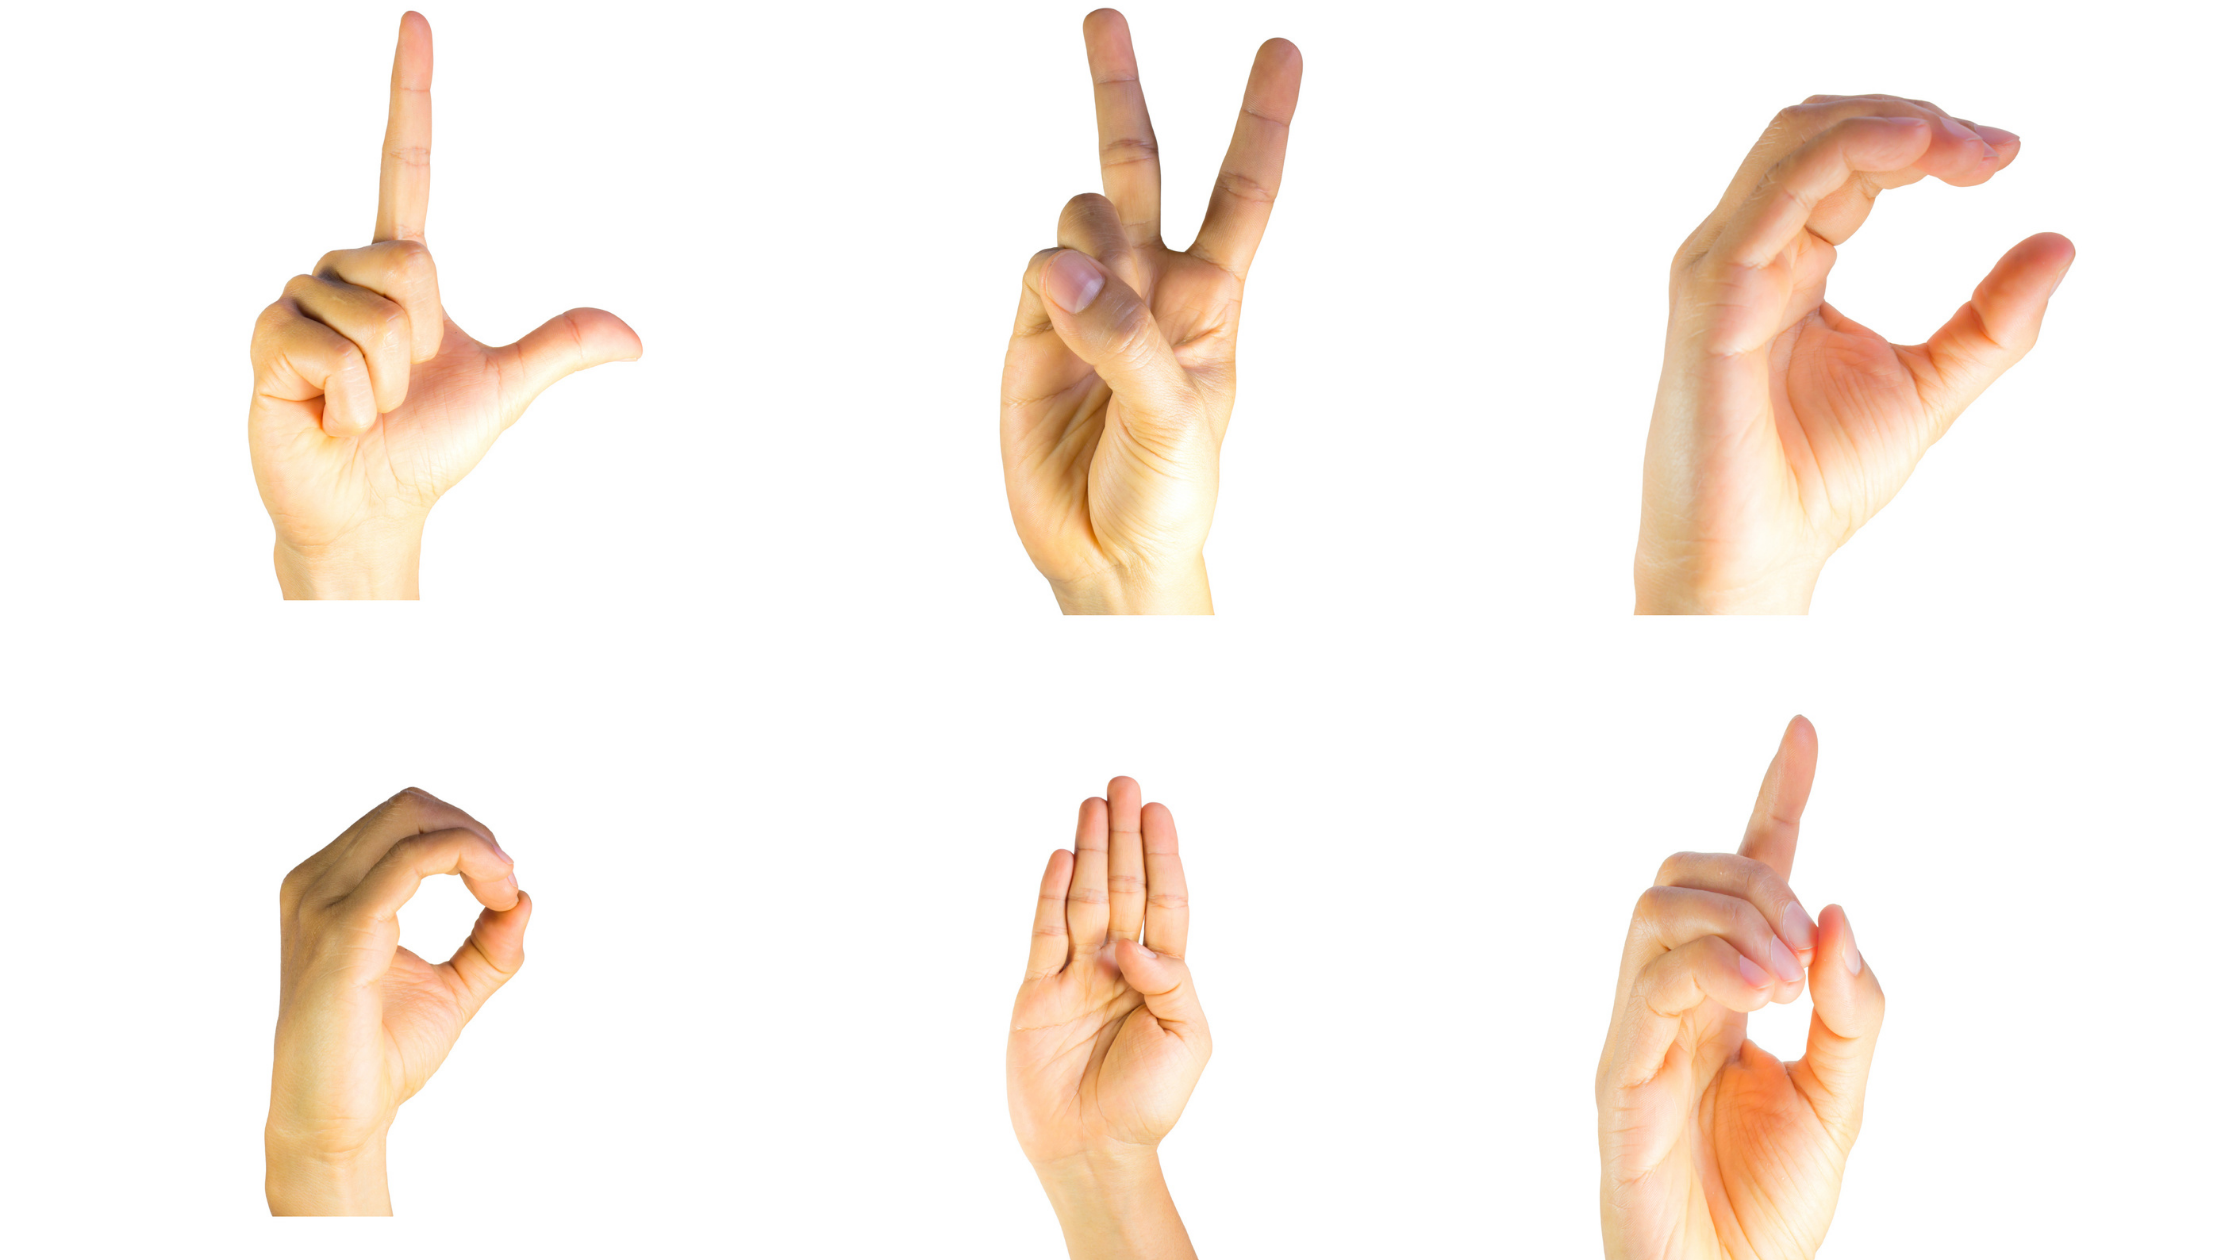 hands showing American Sign Language signs